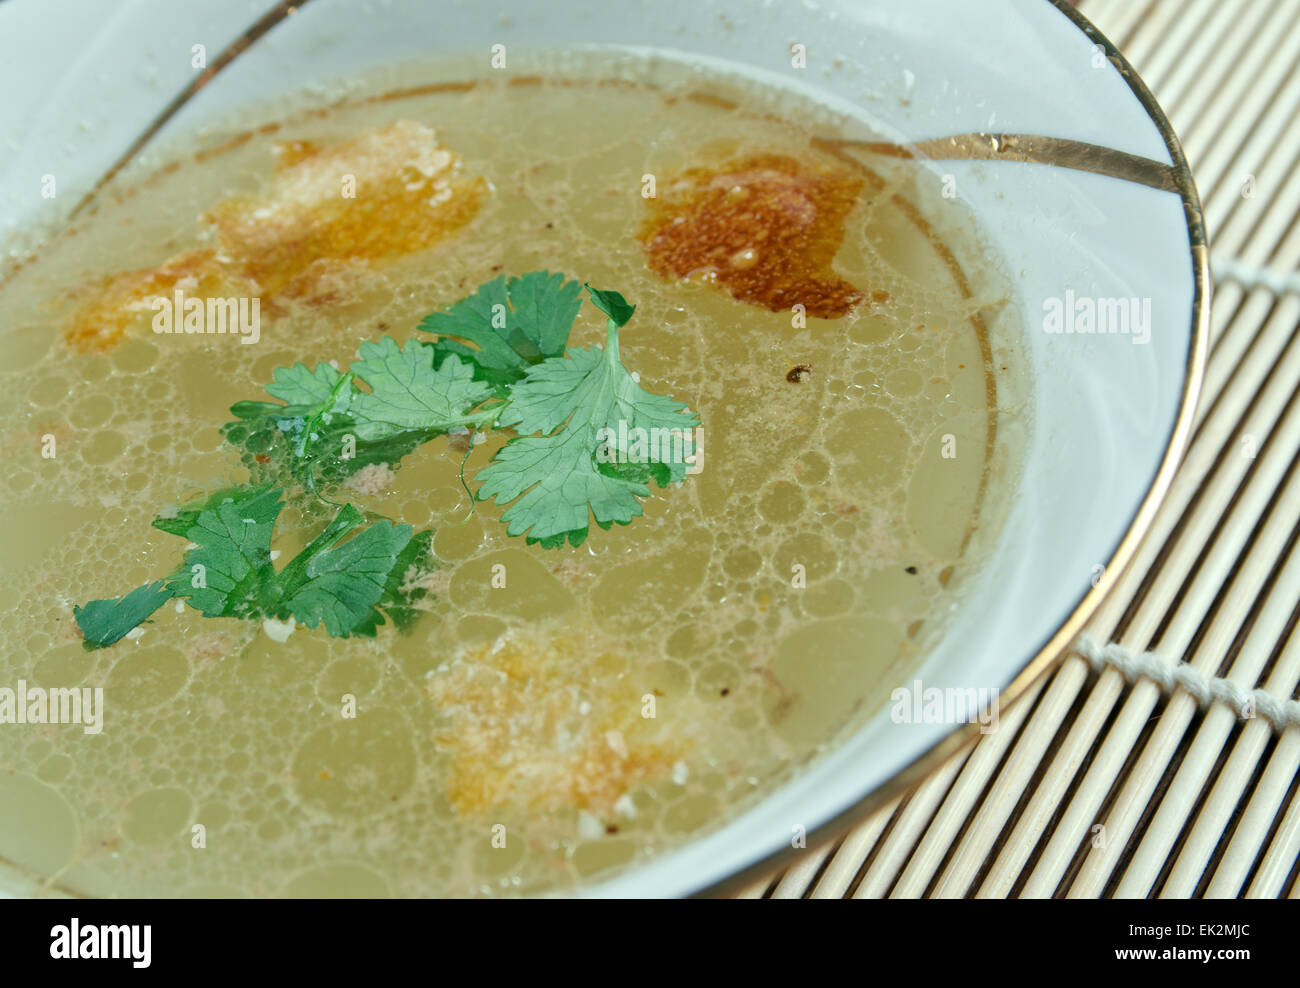 Beef Consomme - clear soup made from richly flavored stock or bouillon. Stock Photo